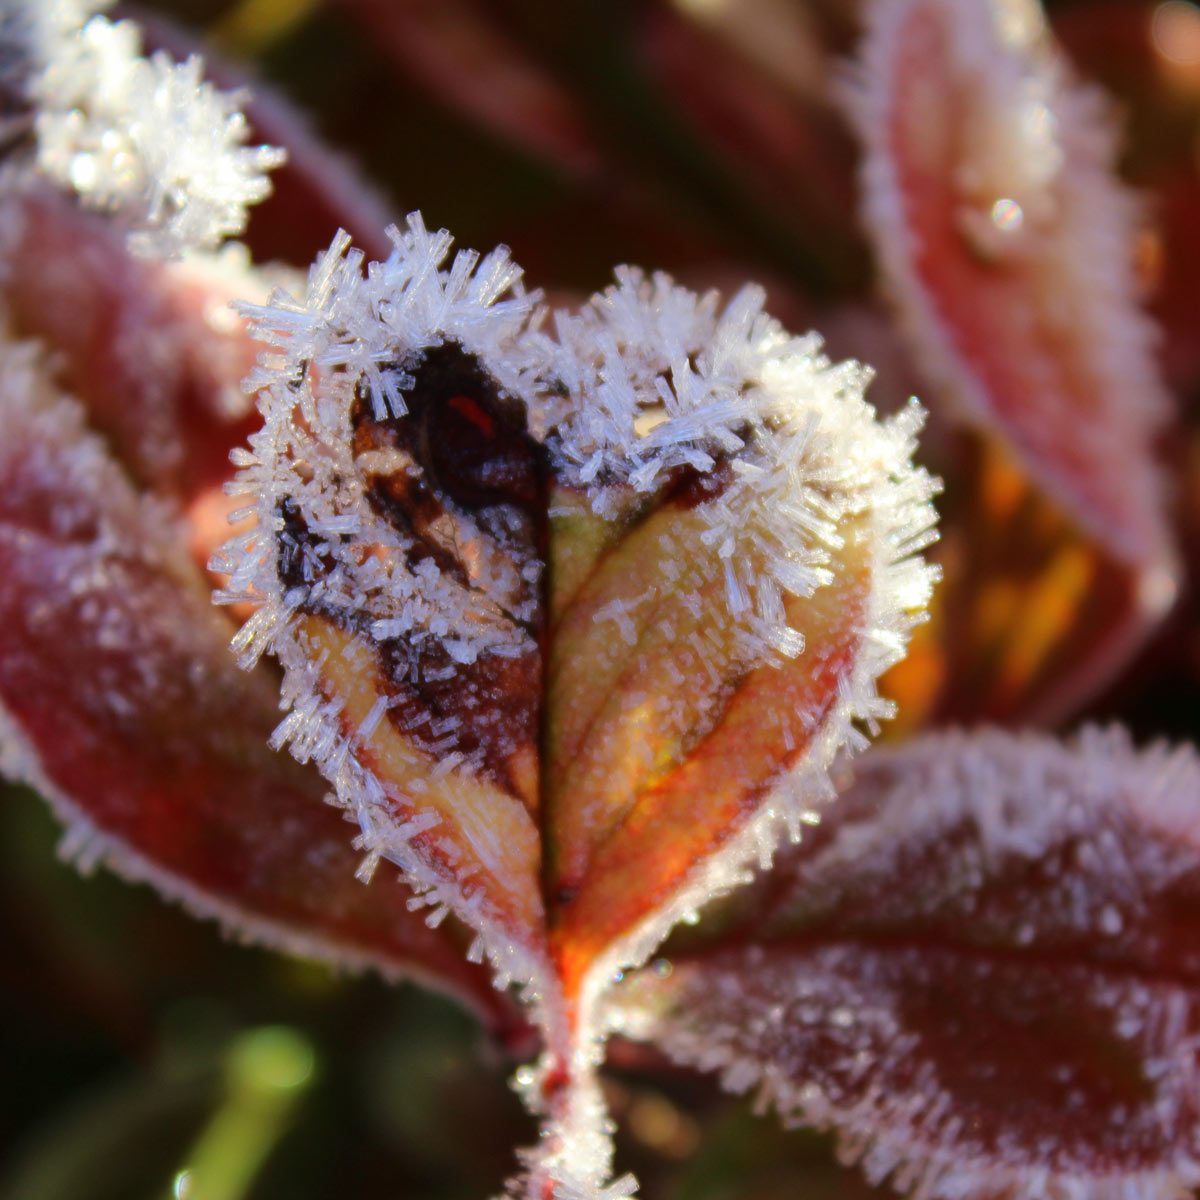  Protect Your Plants from Frost During a Cold Snap